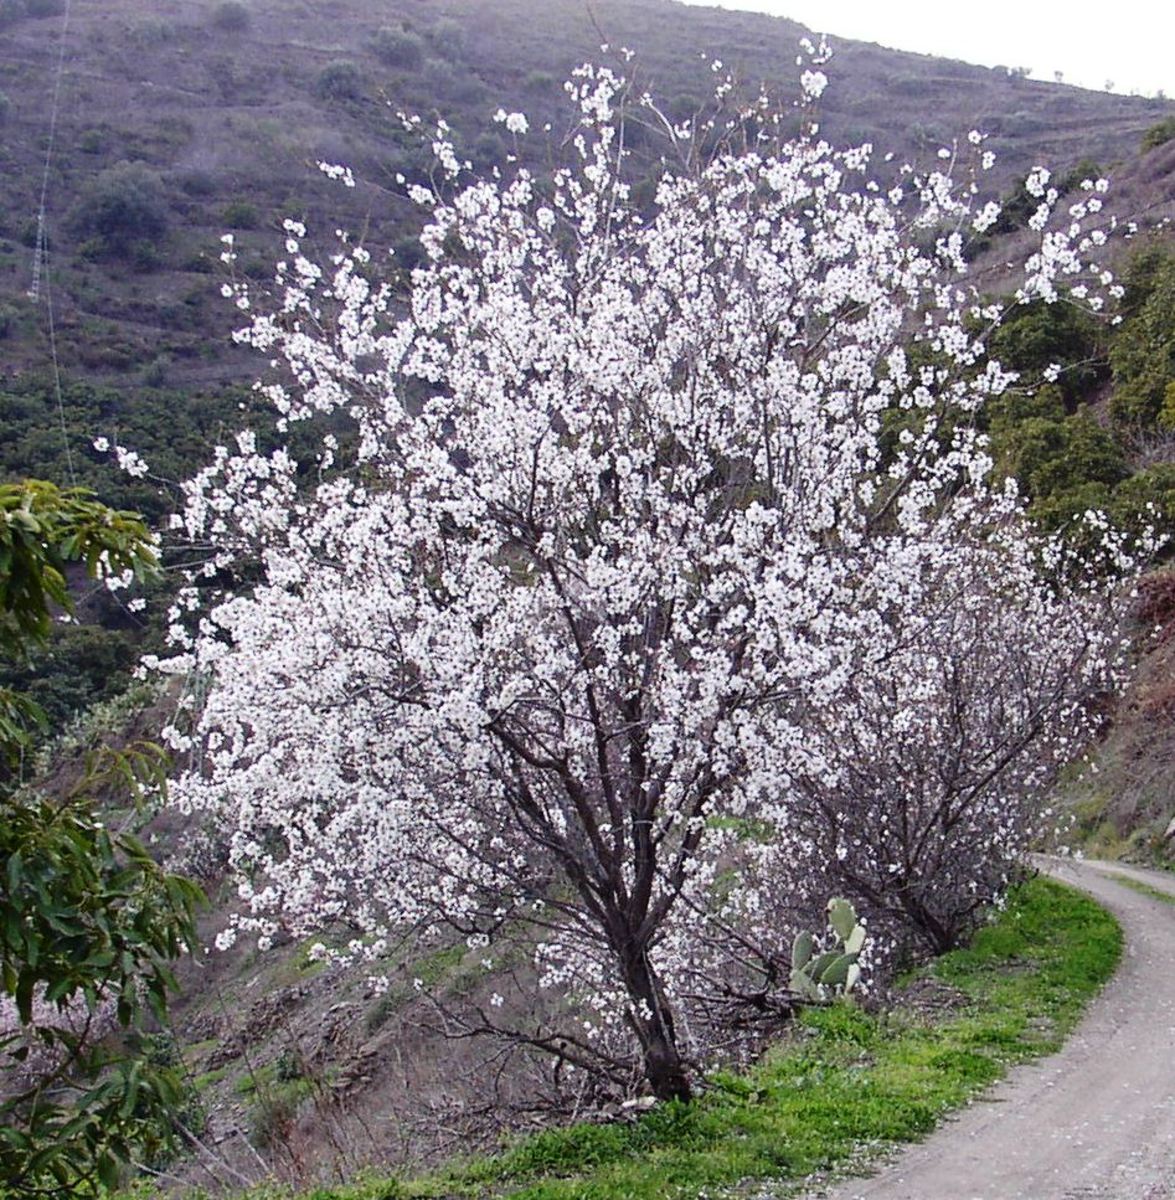 To find sweet almonds the flowers must be white.  Do not pick all your almonds from a tree with pink flowers: they are bitter and contain cyanide! (However the real marzipan flavour comes from adding 4% to 6% bitter almond)